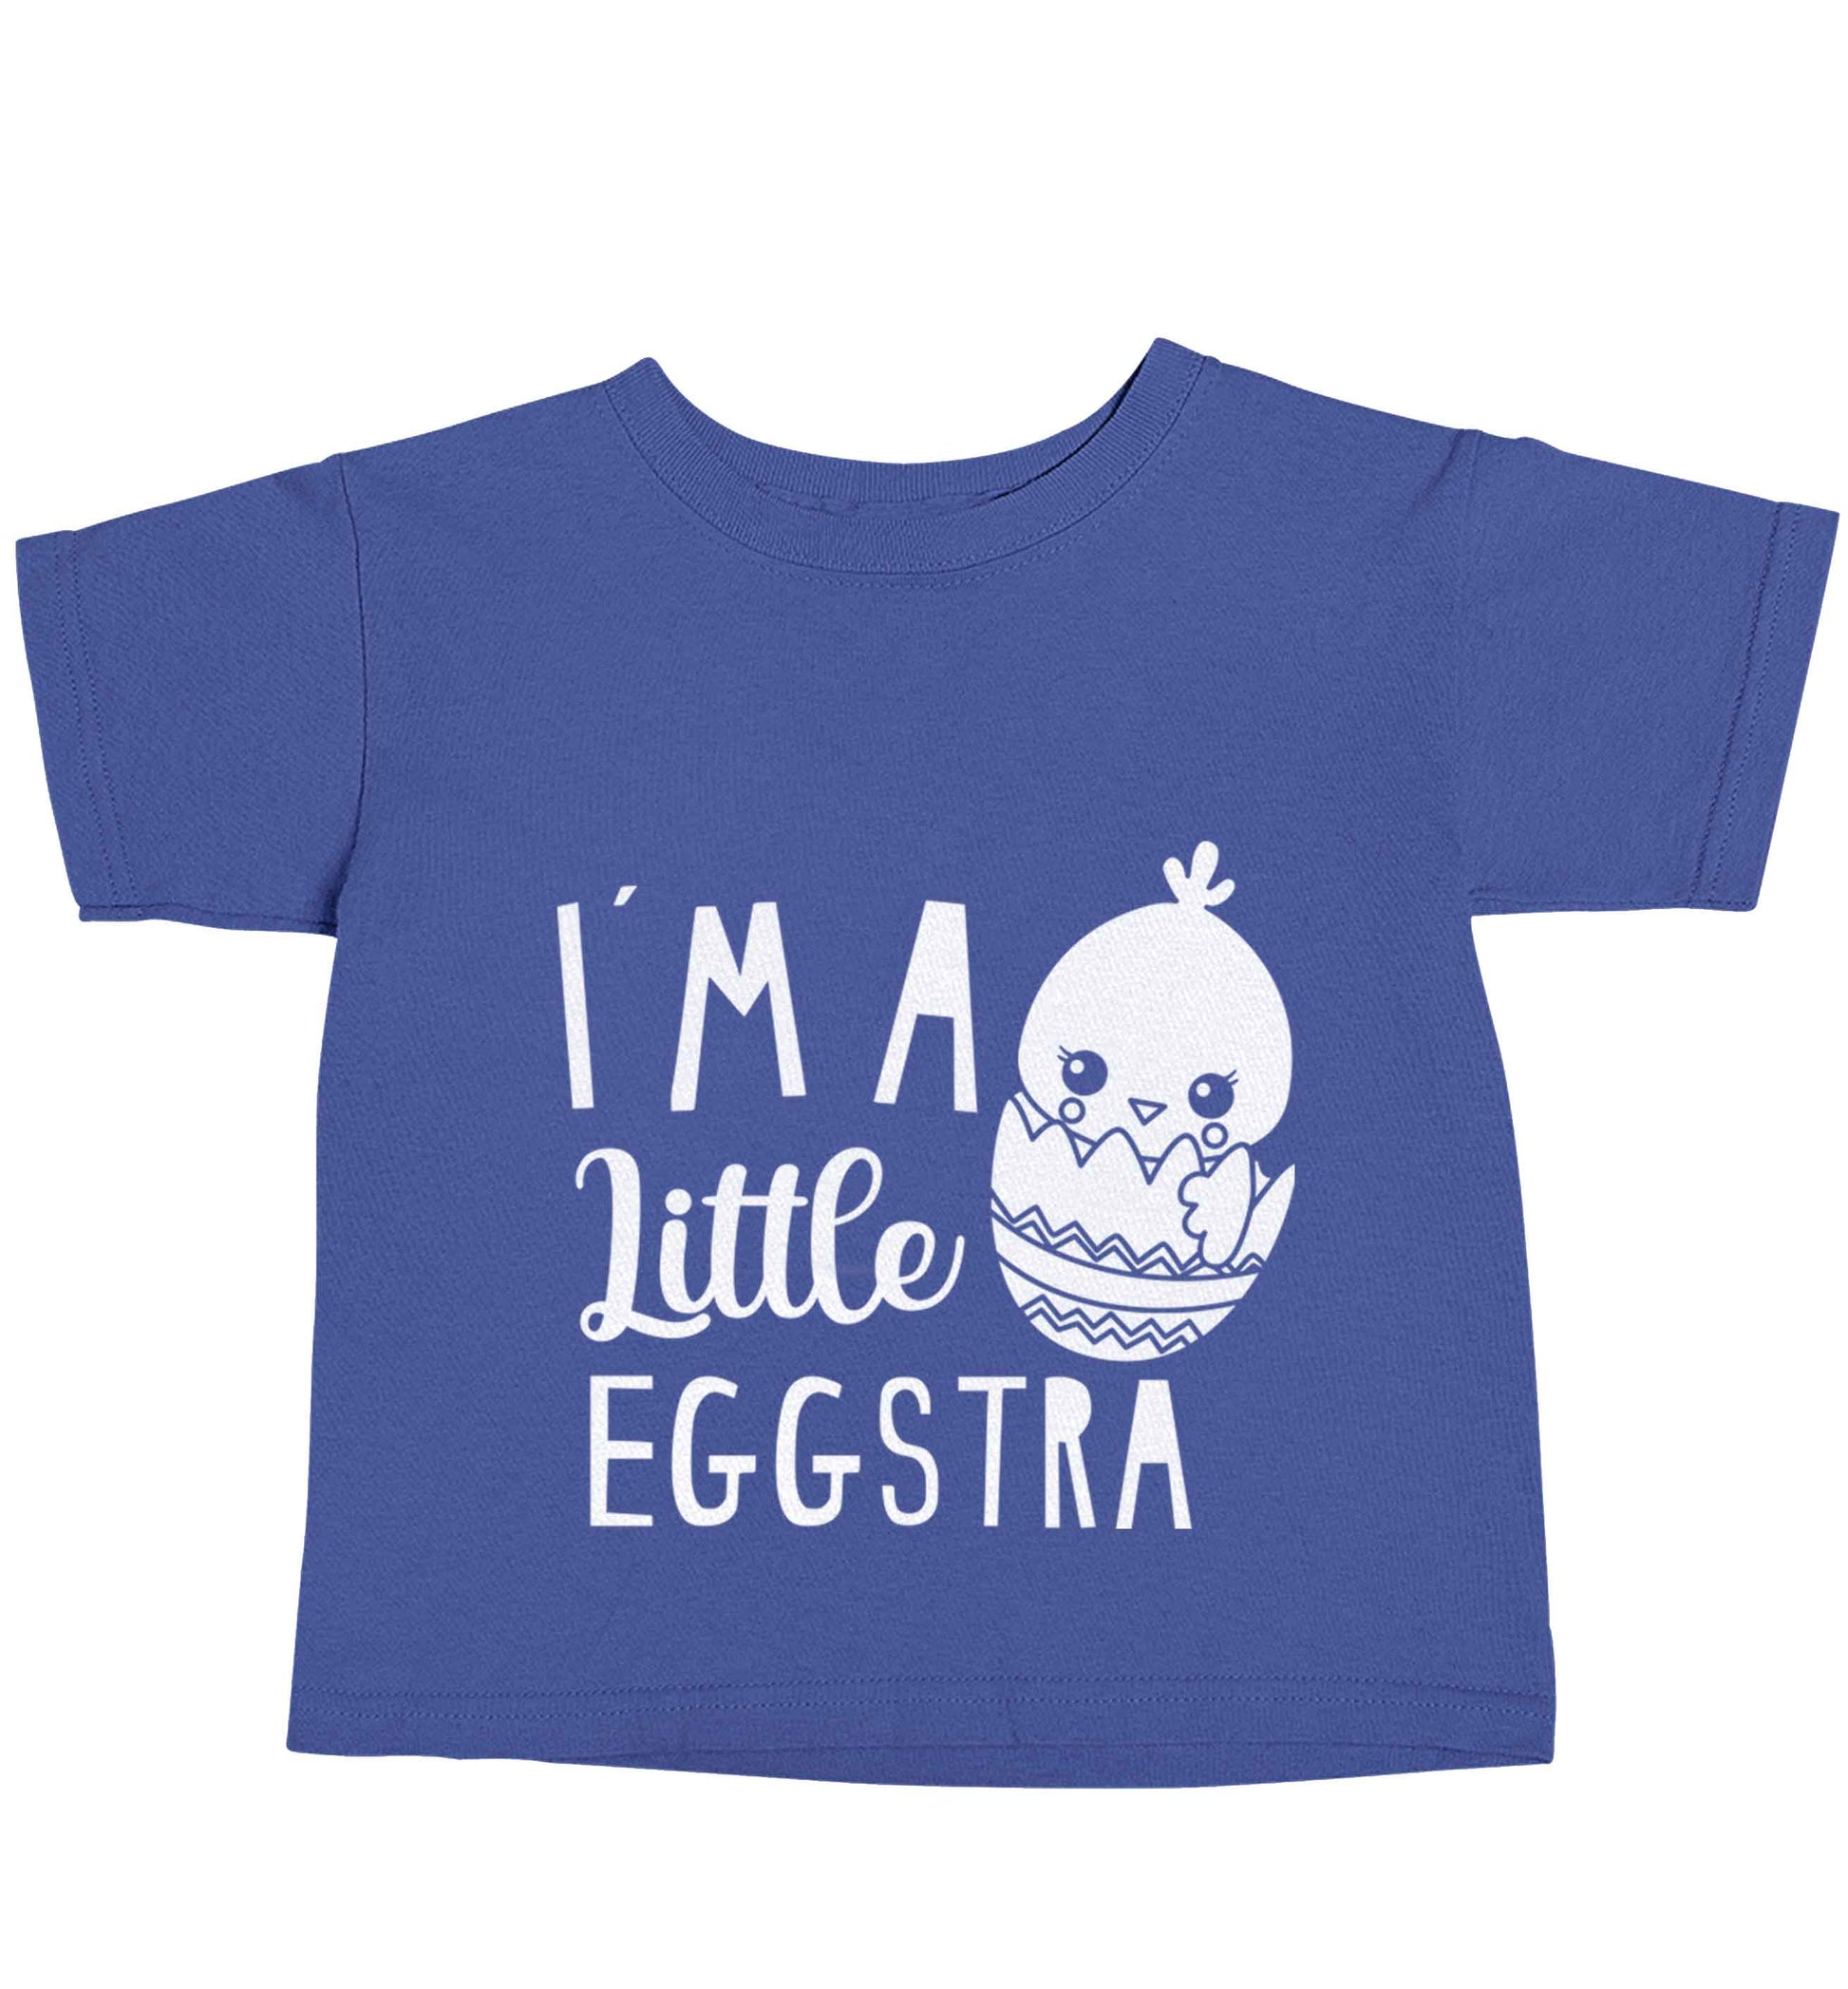 I'm a little eggstra blue baby toddler Tshirt 2 Years